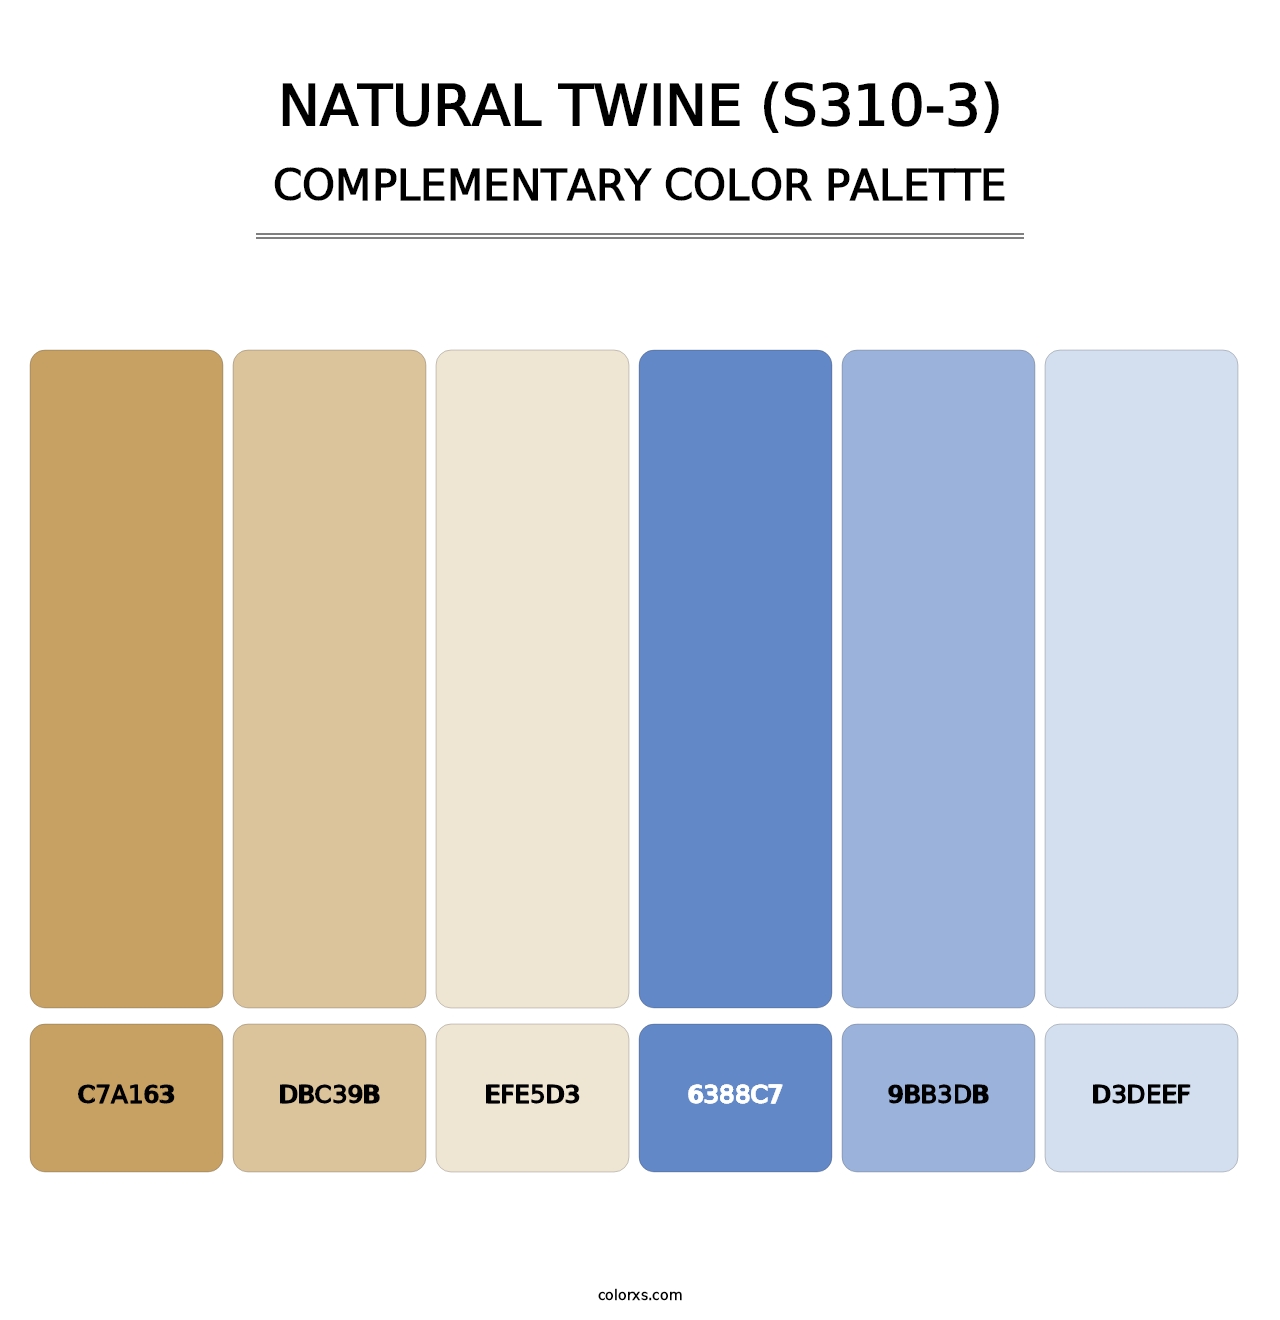 Natural Twine (S310-3) - Complementary Color Palette